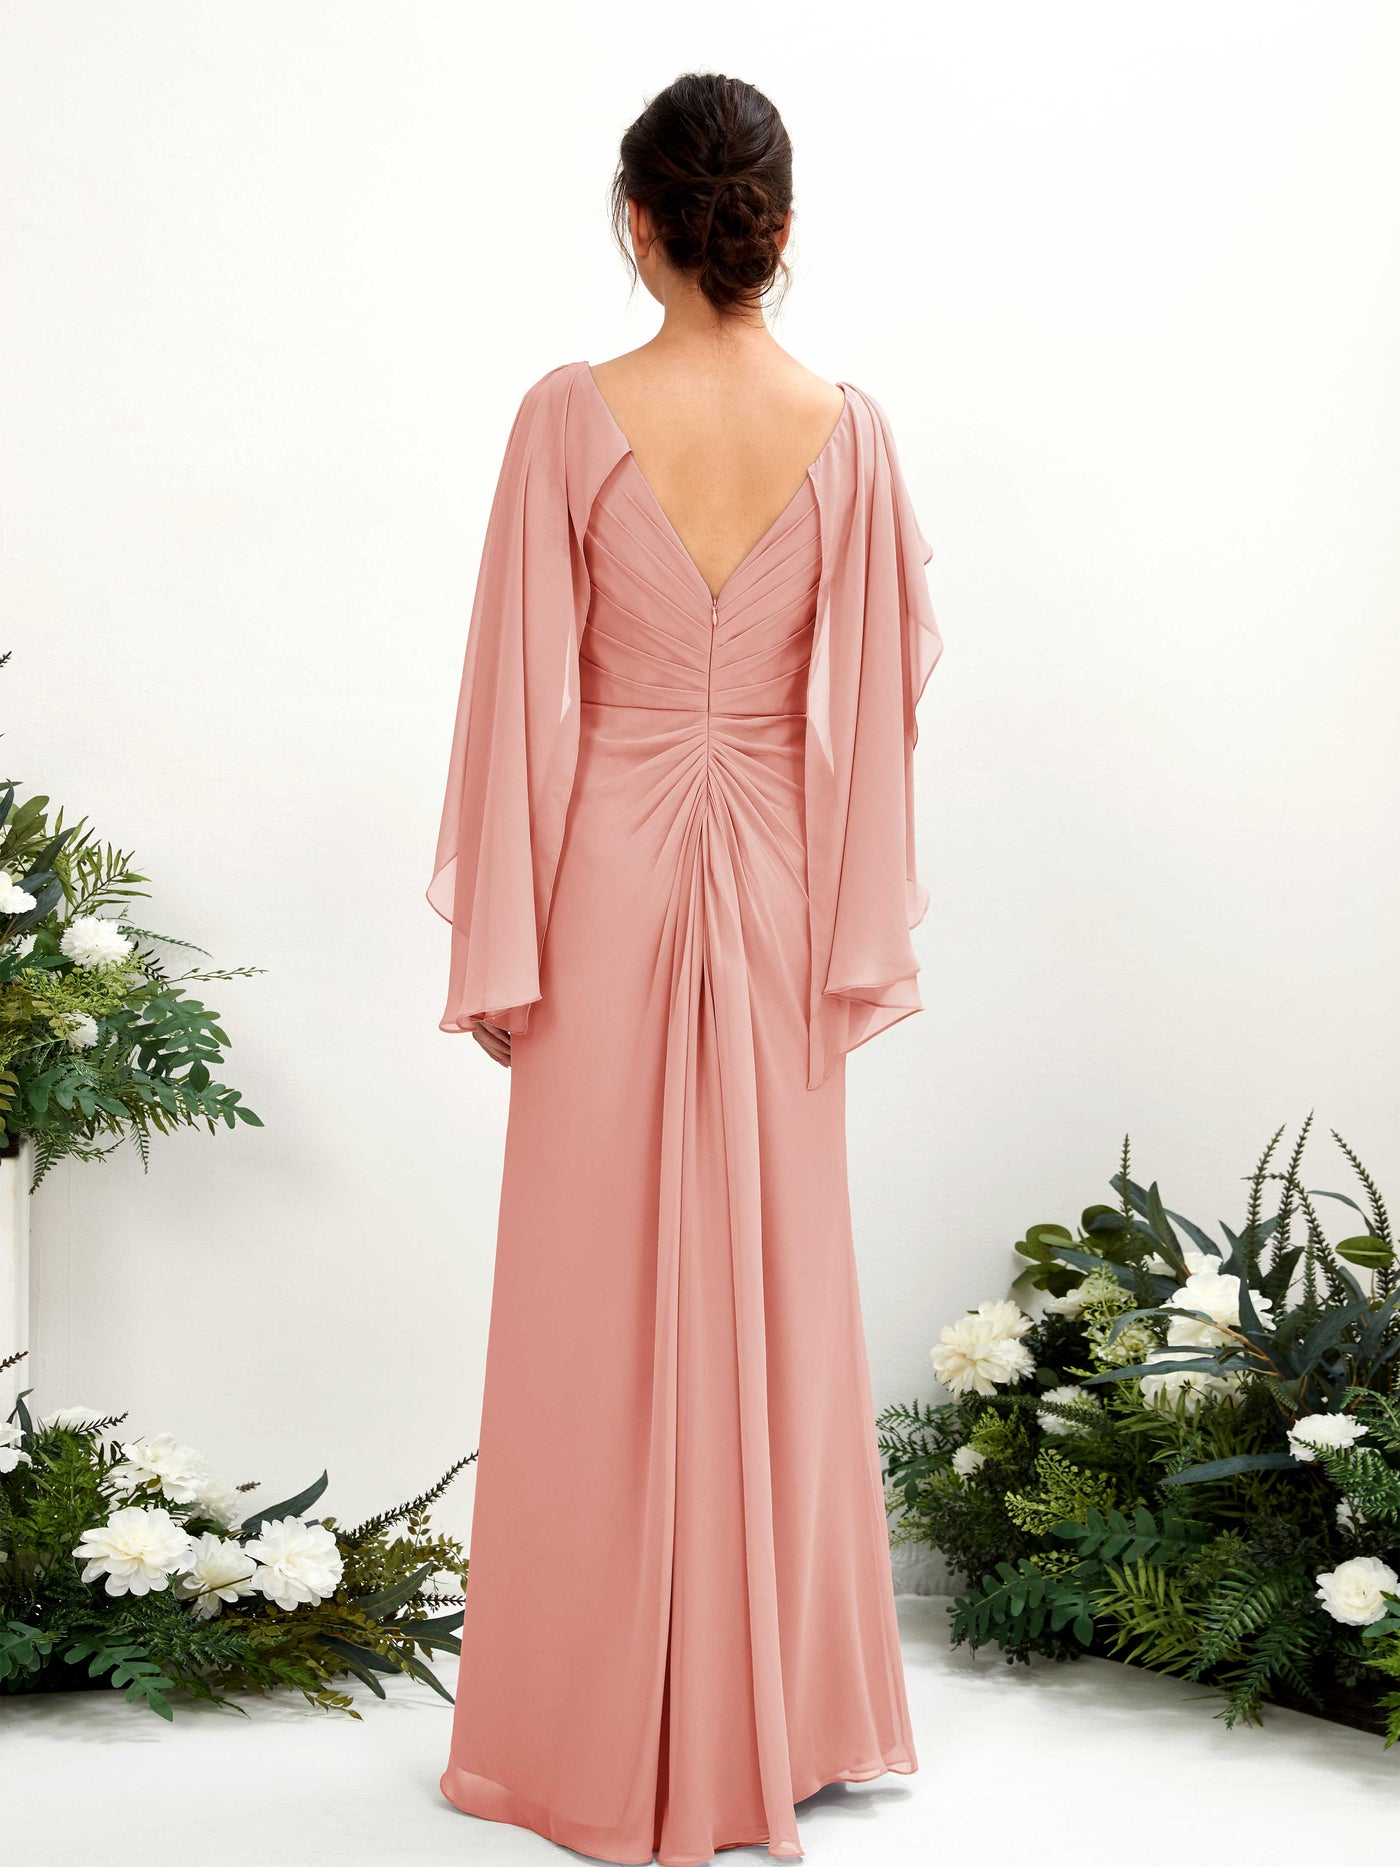 Champagne Rose Bridesmaid Dresses Bridesmaid Dress A-line Chiffon Straps Full Length Long Sleeves Wedding Party Dress (80220106)#color_champagne-rose